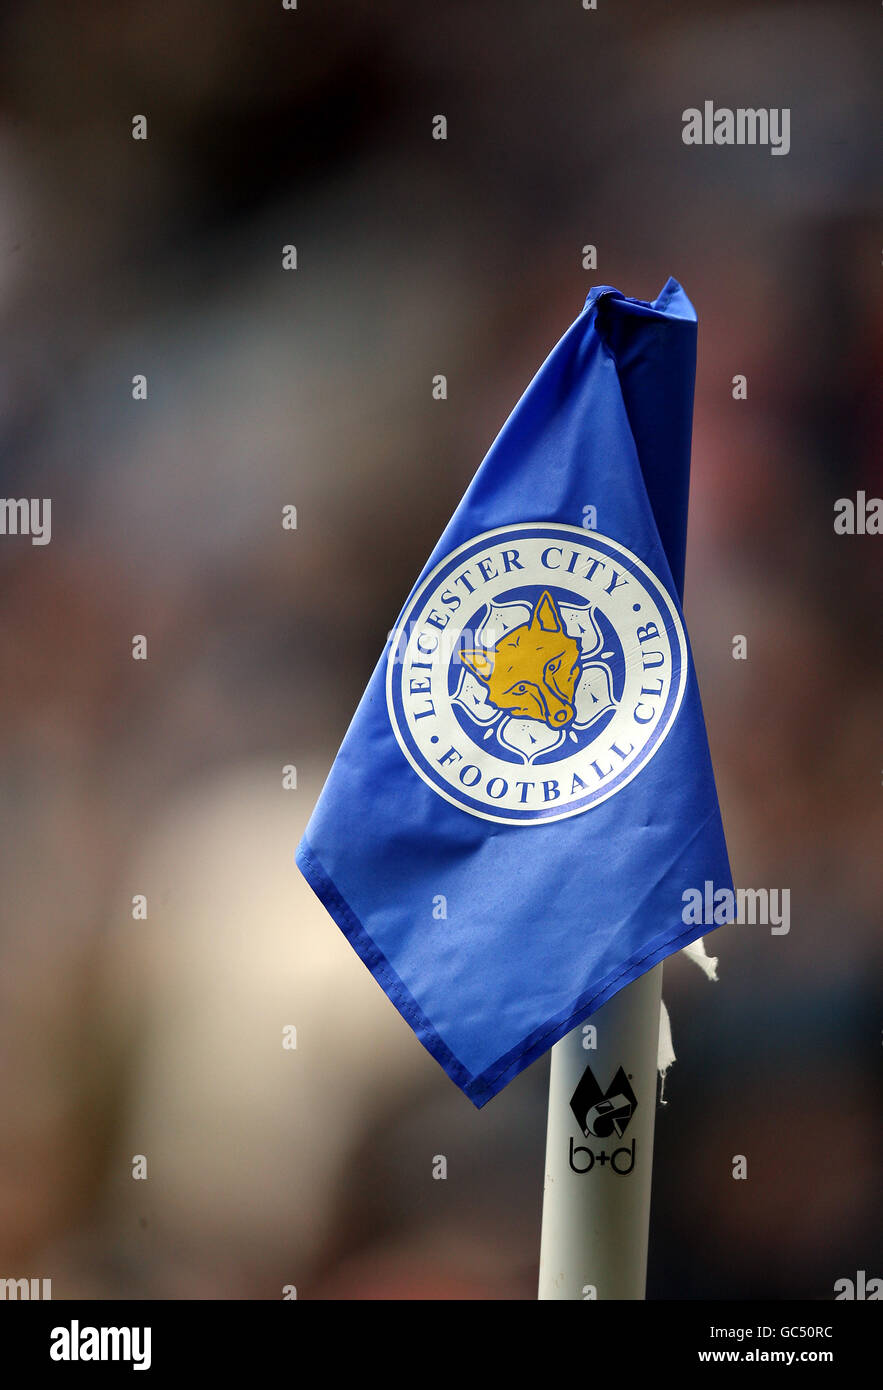 Soccer - Coca-Cola Football League Championship - Leicester City v Derby County - The Walkers Stadium. The corner flag at Leicester City Stock Photo